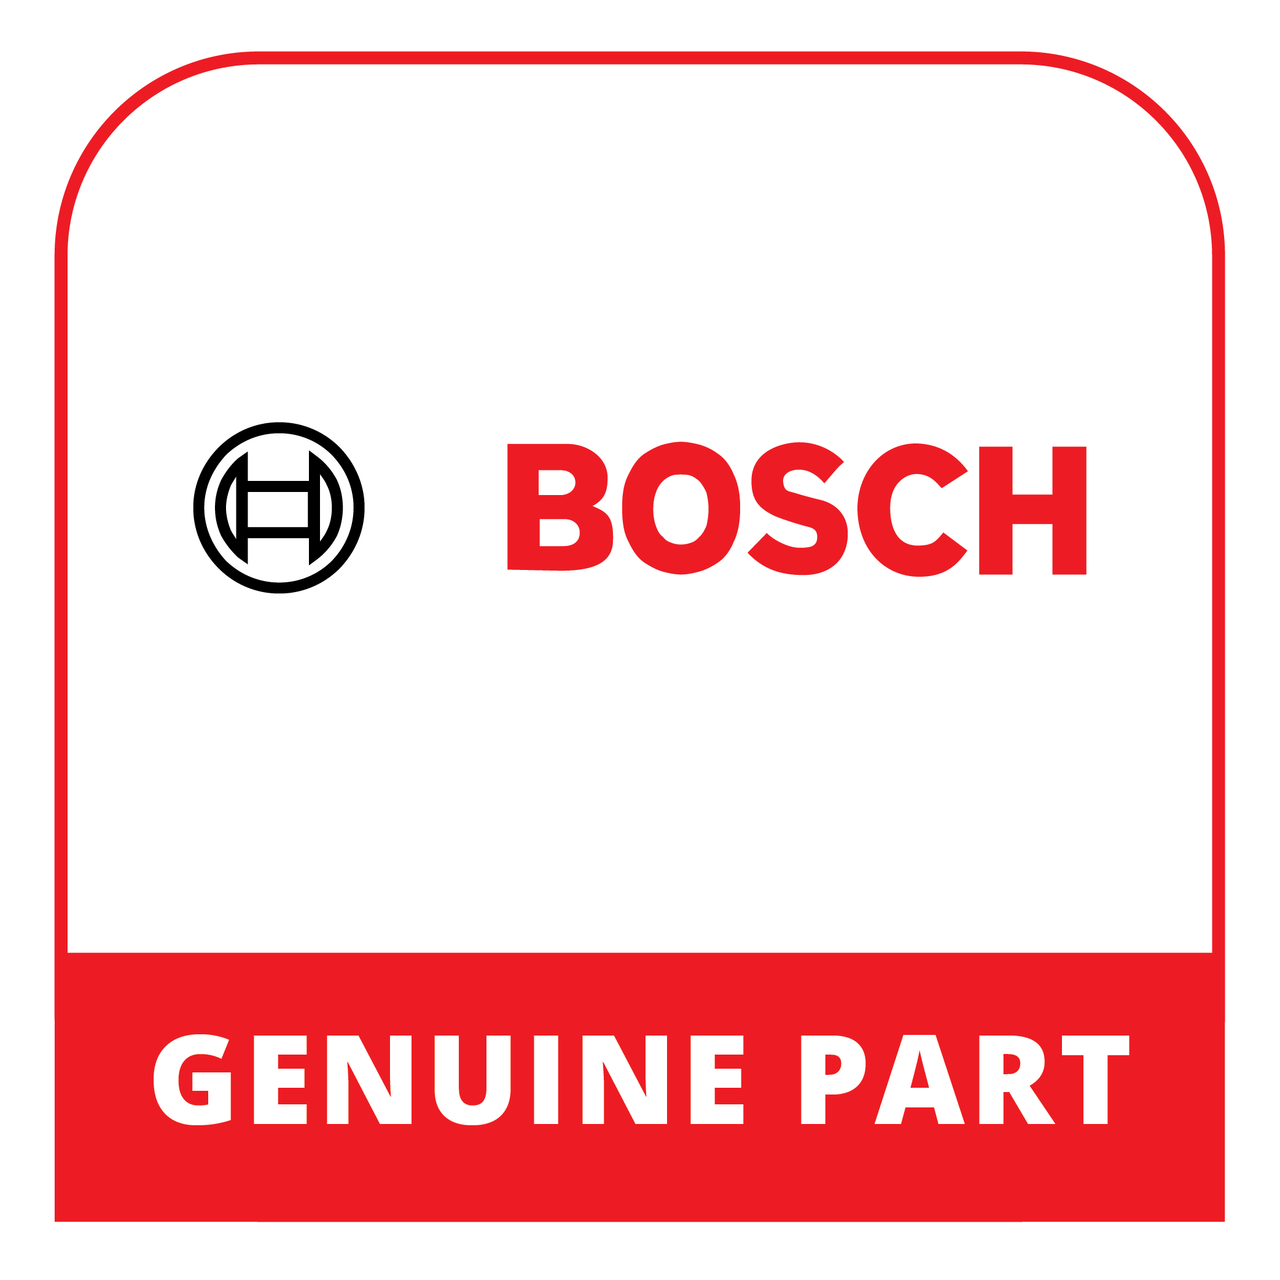 Bosch (Thermador) 23000264 - Panel Side - Genuine Bosch (Thermador) Part